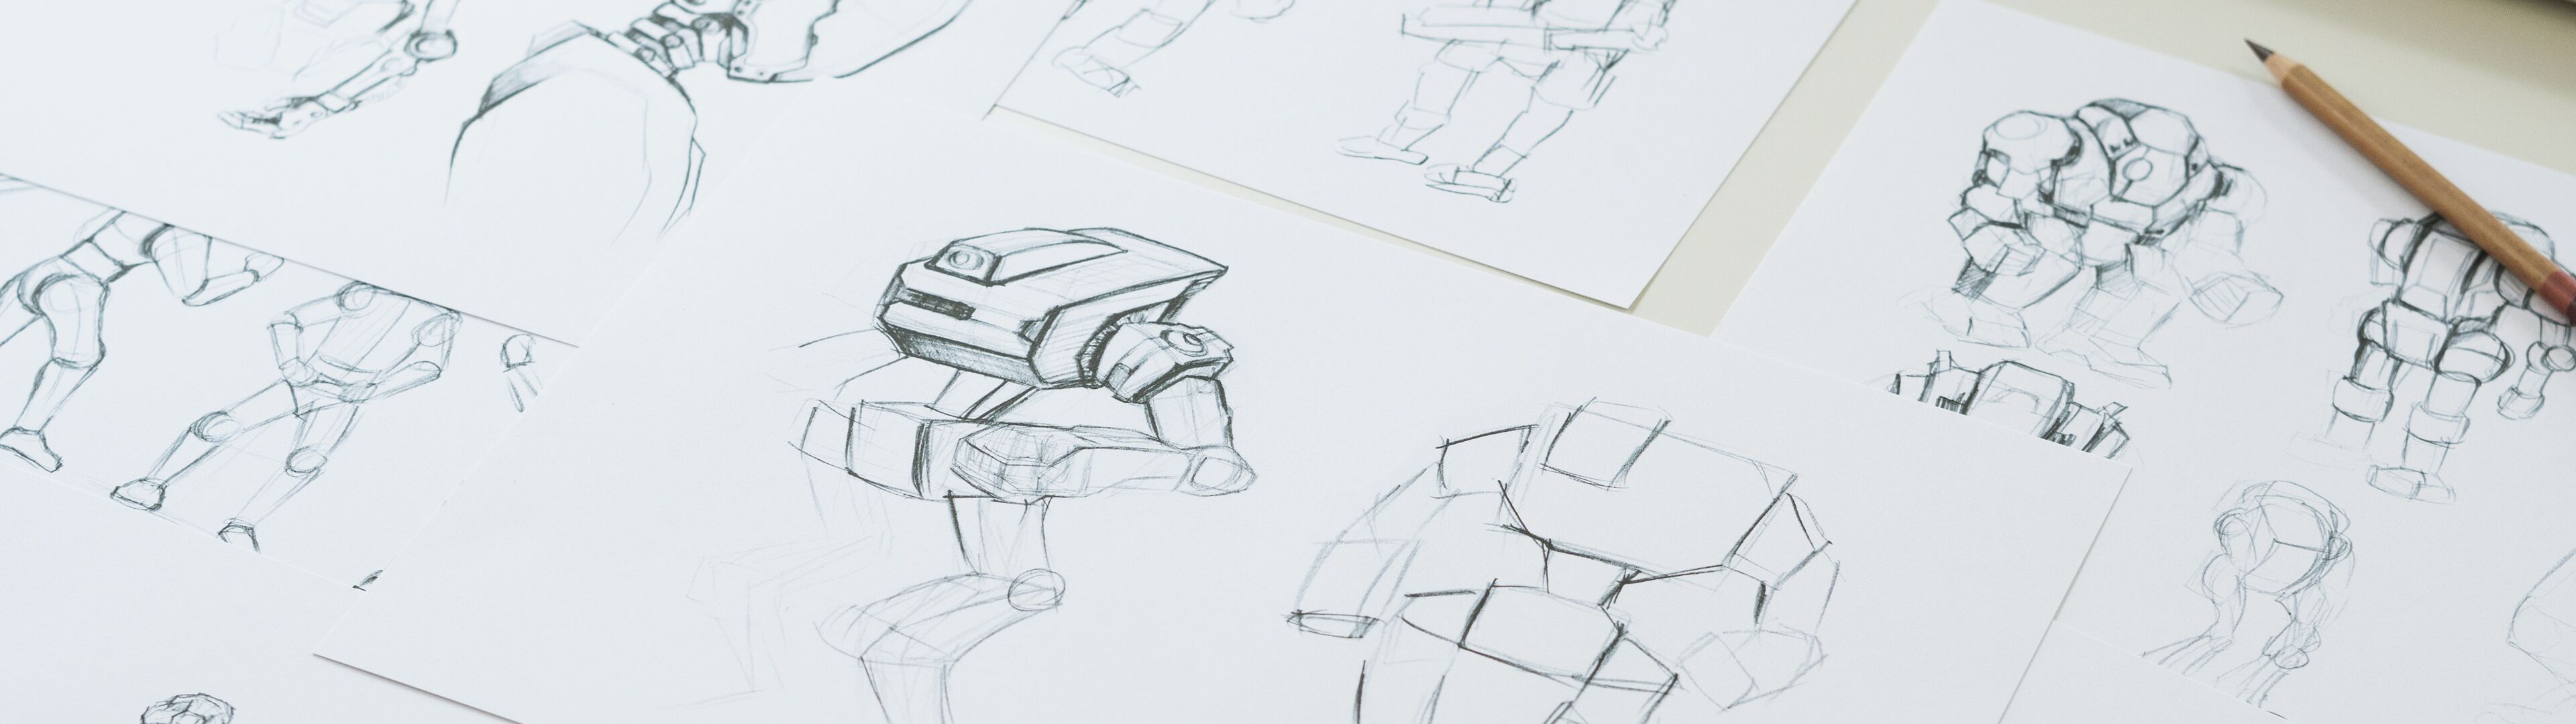 Multiple sketches of a robot character in various poses spread across a designer's workspace, illustrating the concept development process.